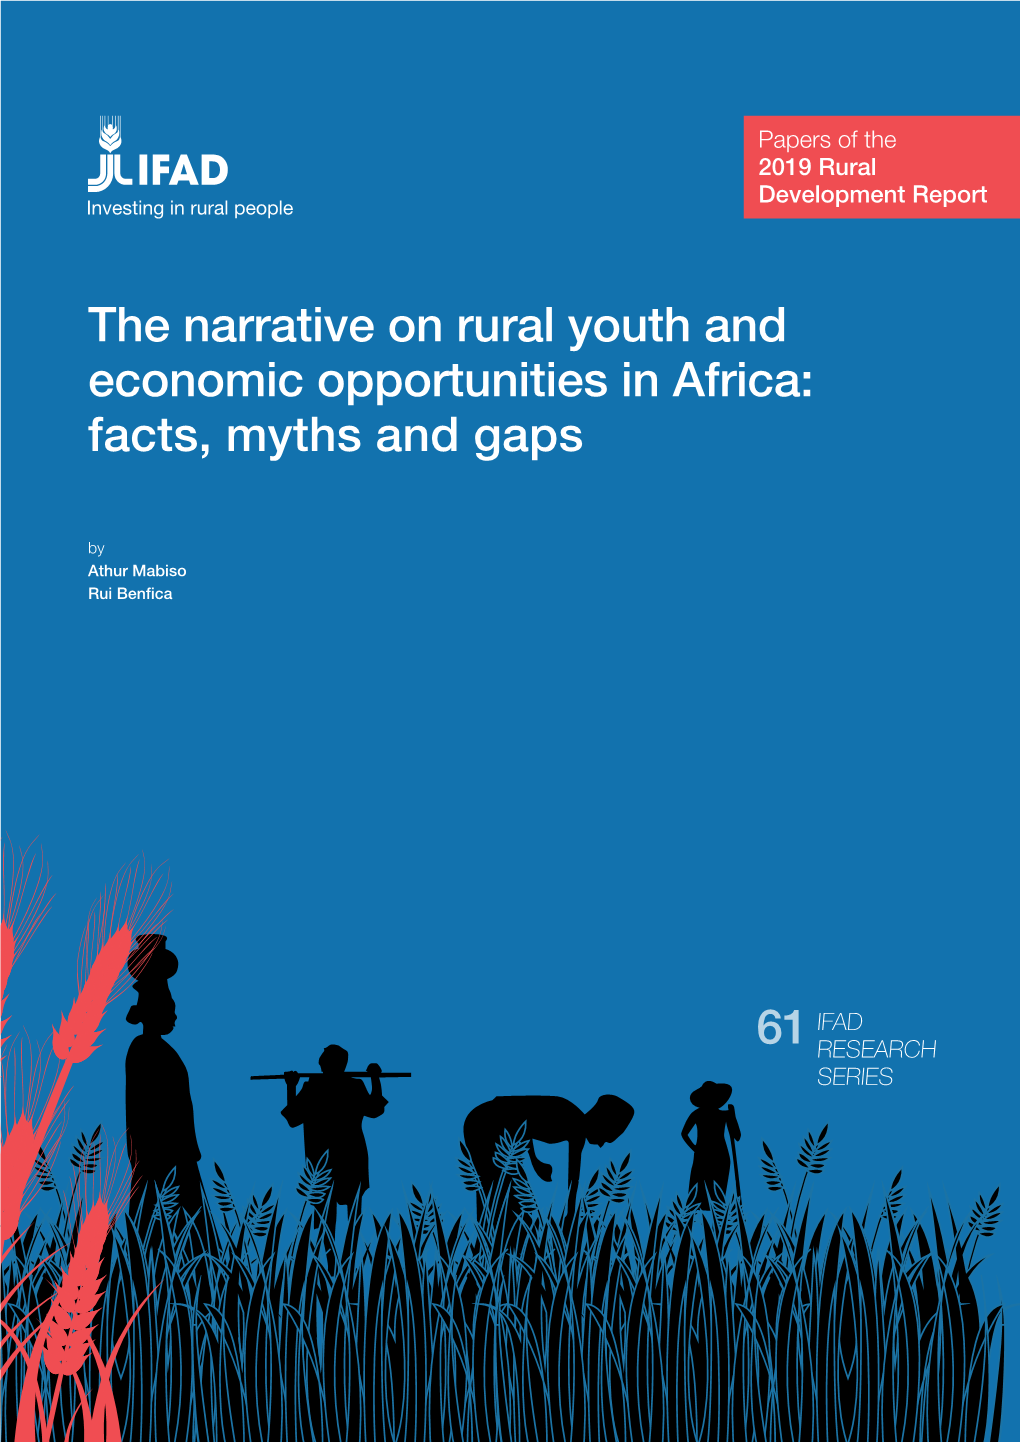 The Narrative on Rural Youth and Economic Opportunities in Africa: Facts, Myths and Gaps